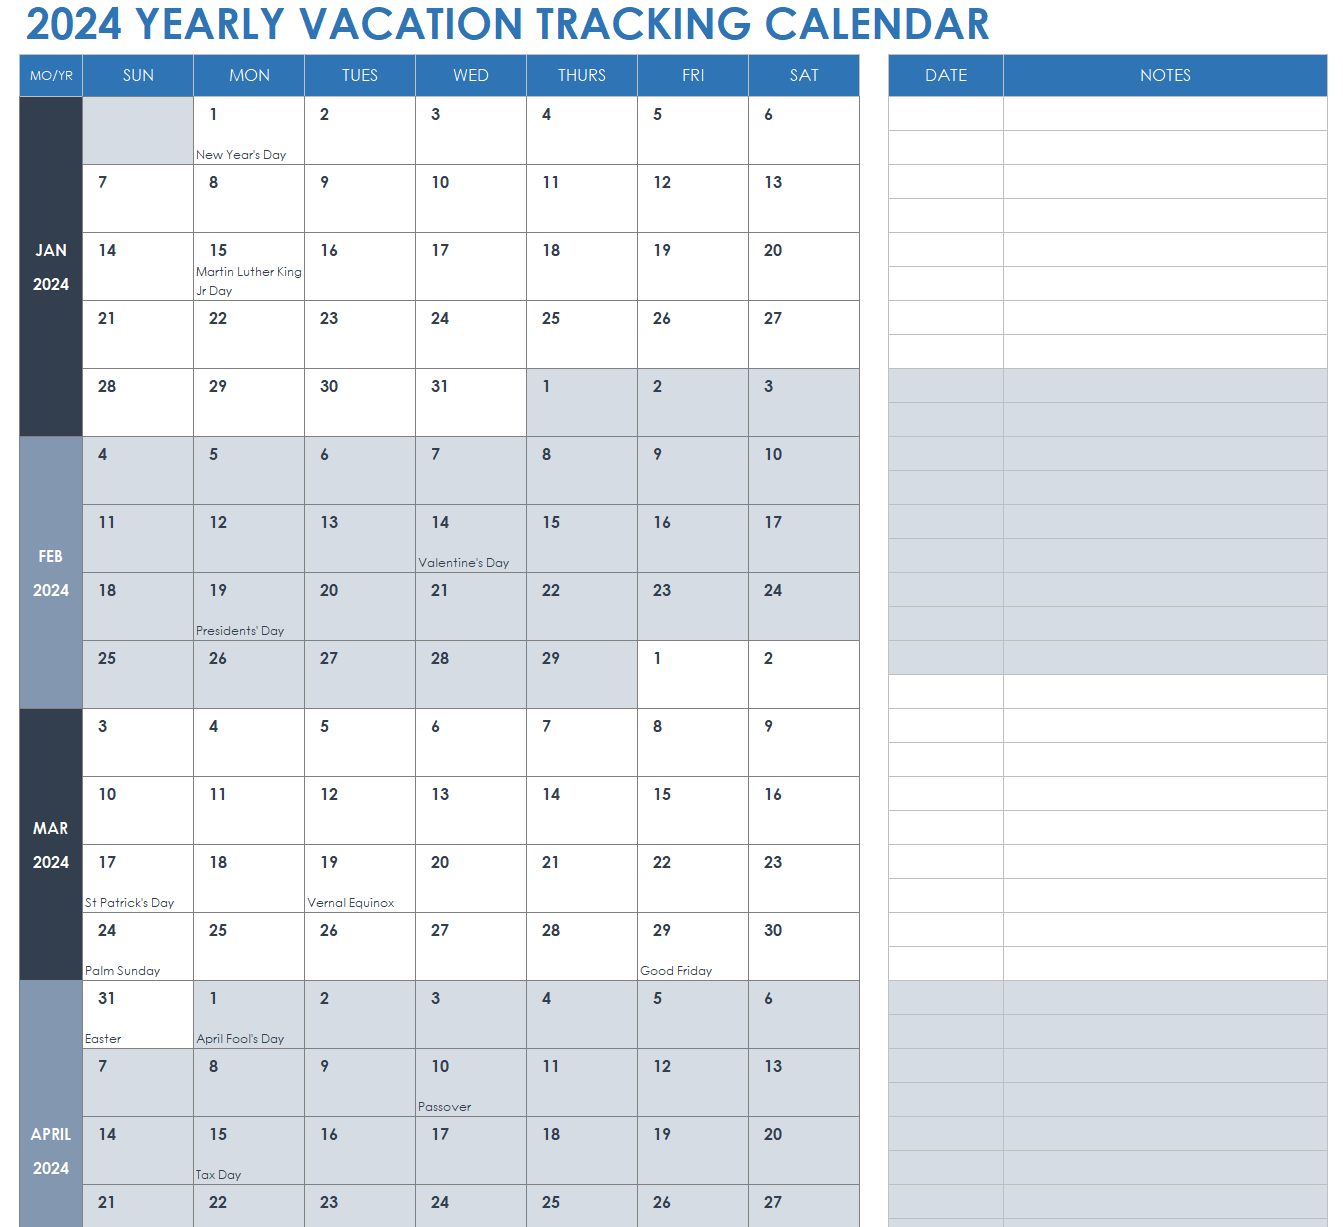 2024 Yearly Vacation Tracking Calendar